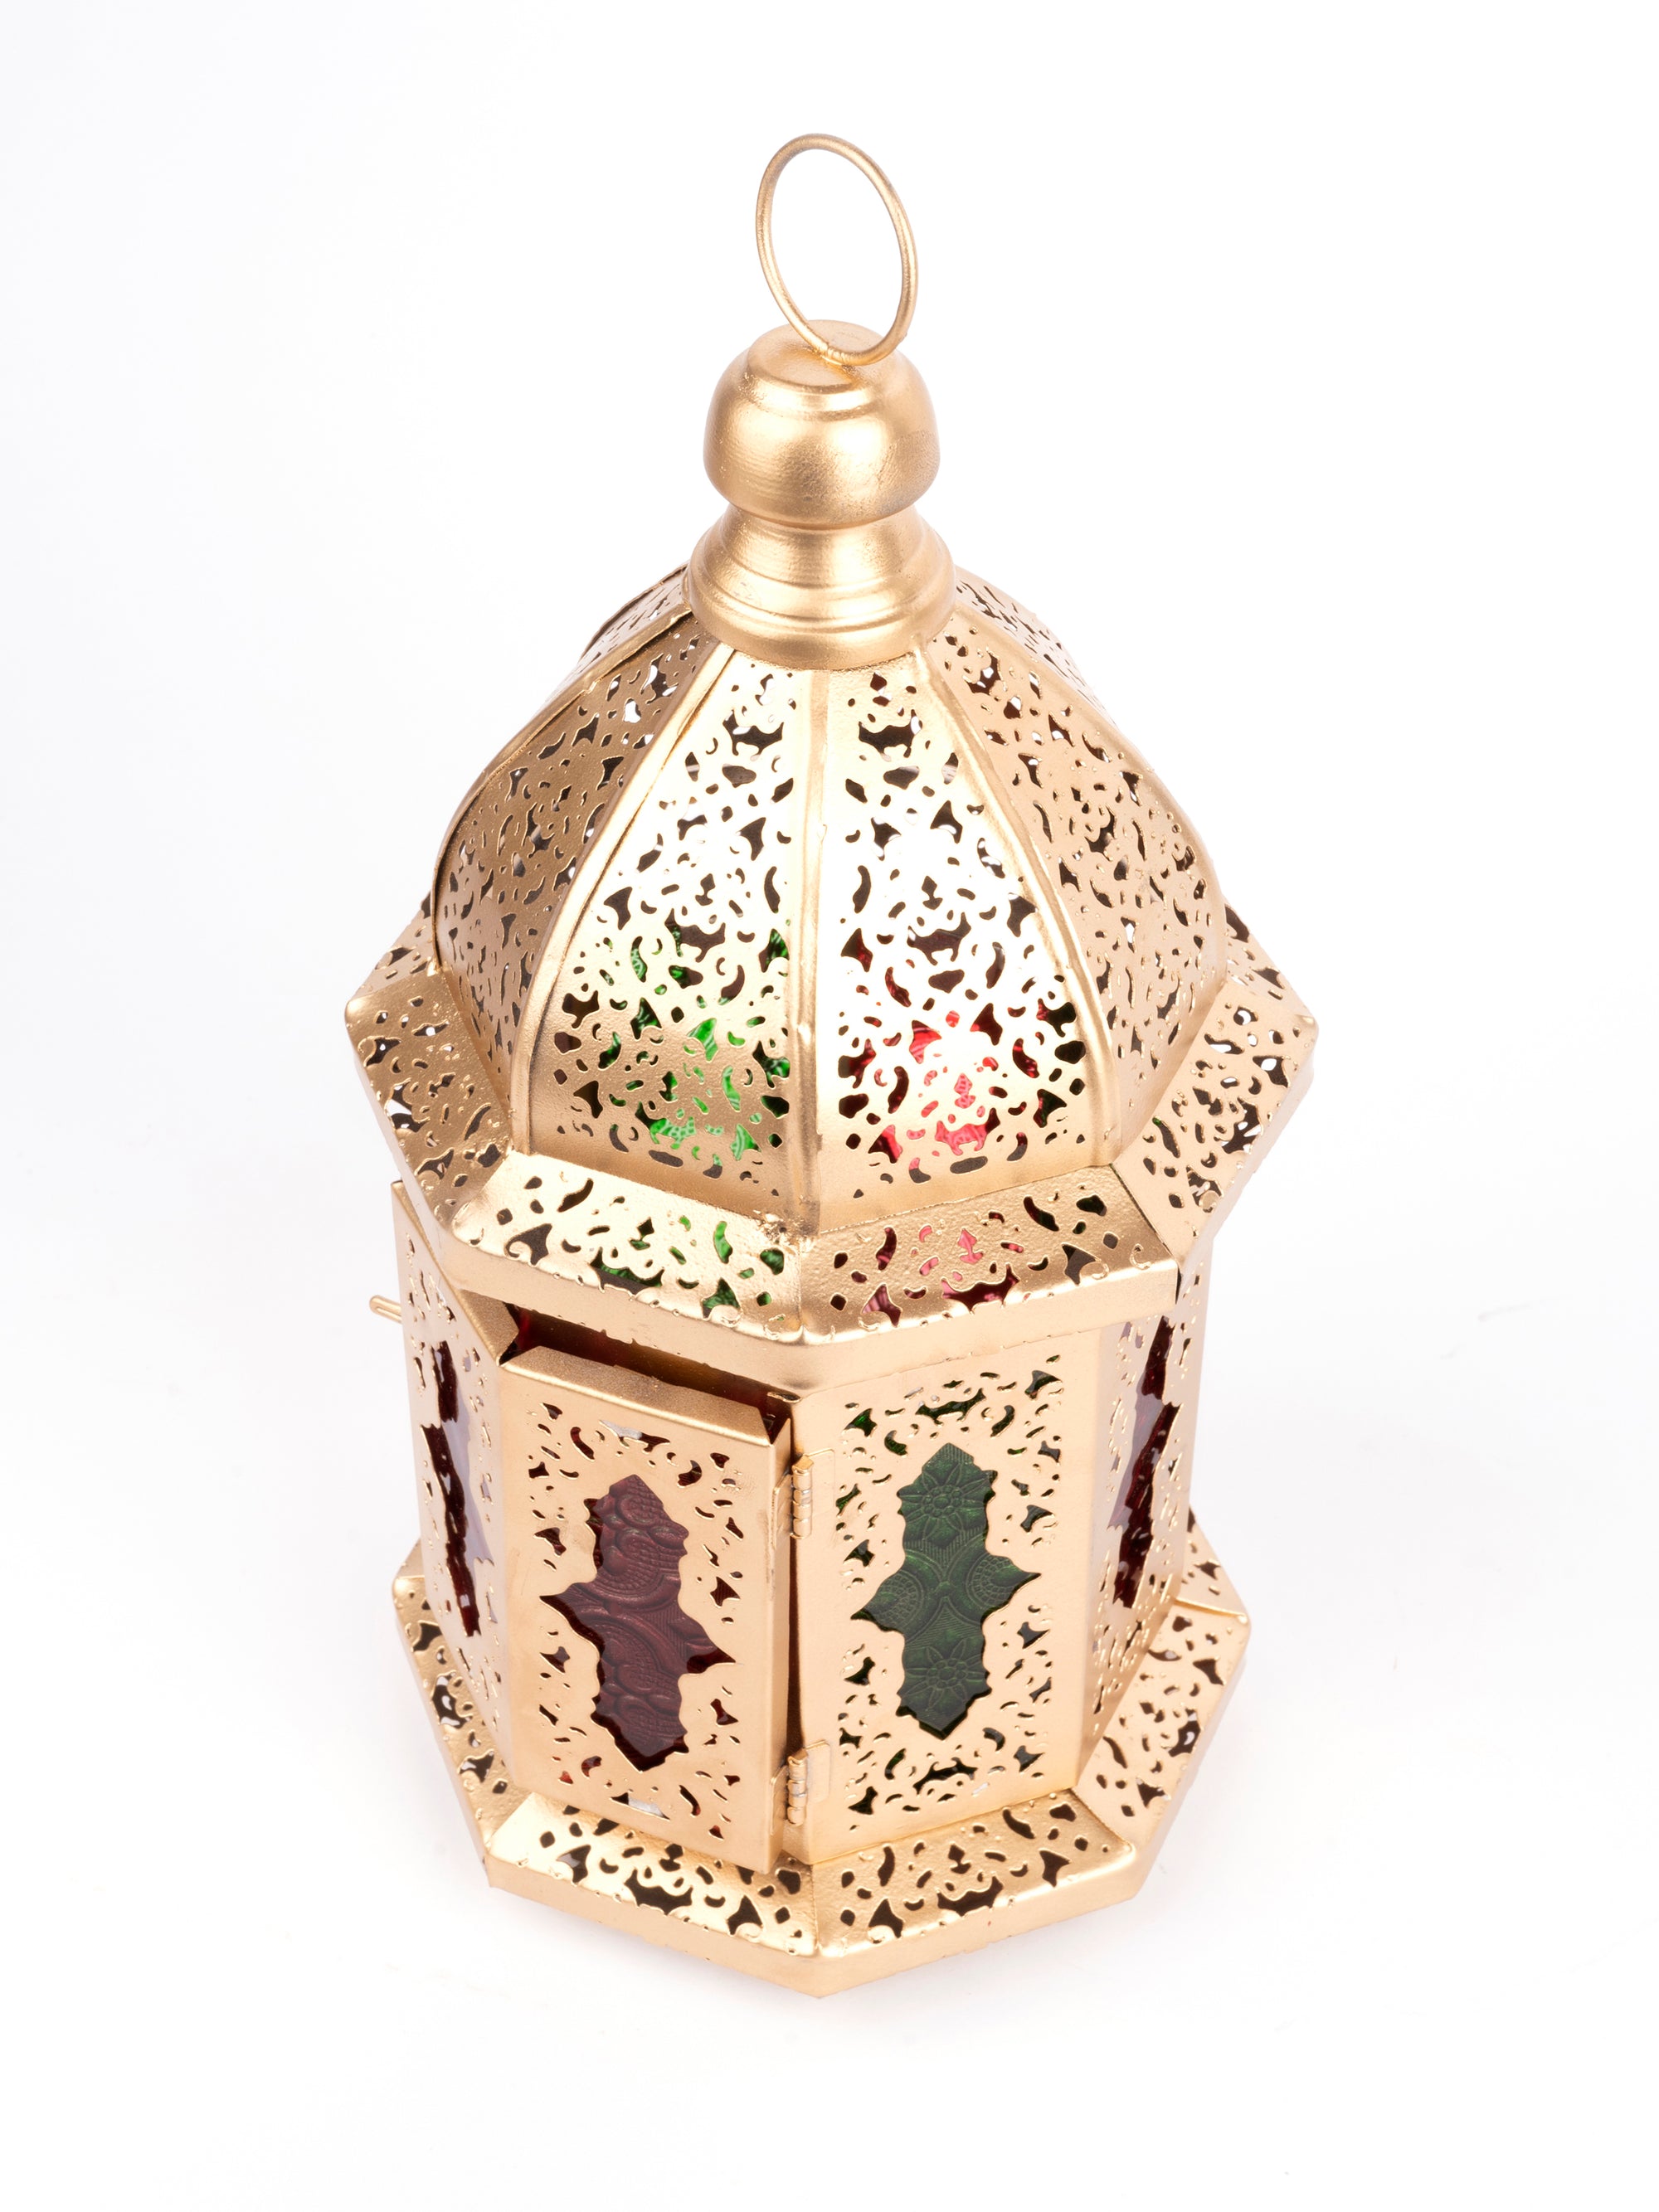 Metal Crafted Gold Lantern, Tea Light Candle Holder - 12 inches height - The Heritage Artifacts